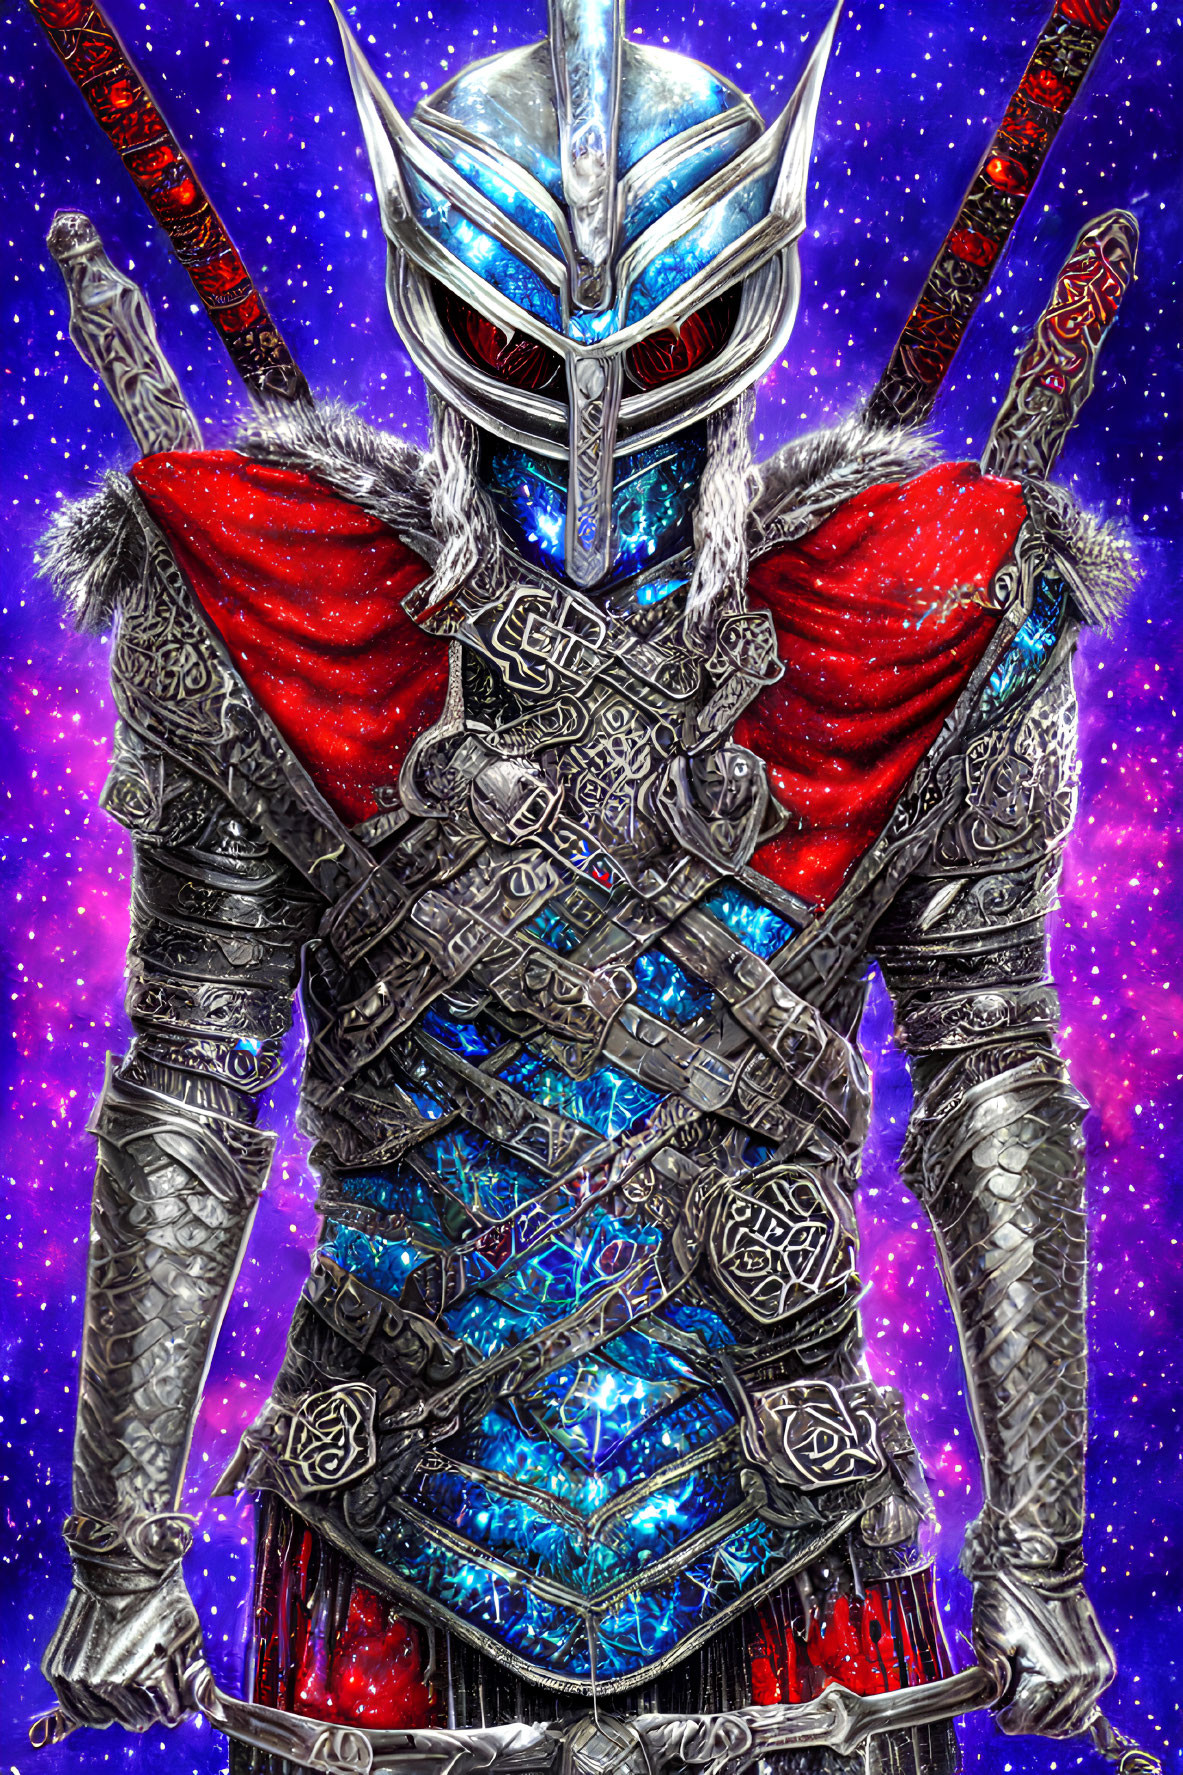 Futuristic knight in silver and blue armor with glowing patterns against starry space background